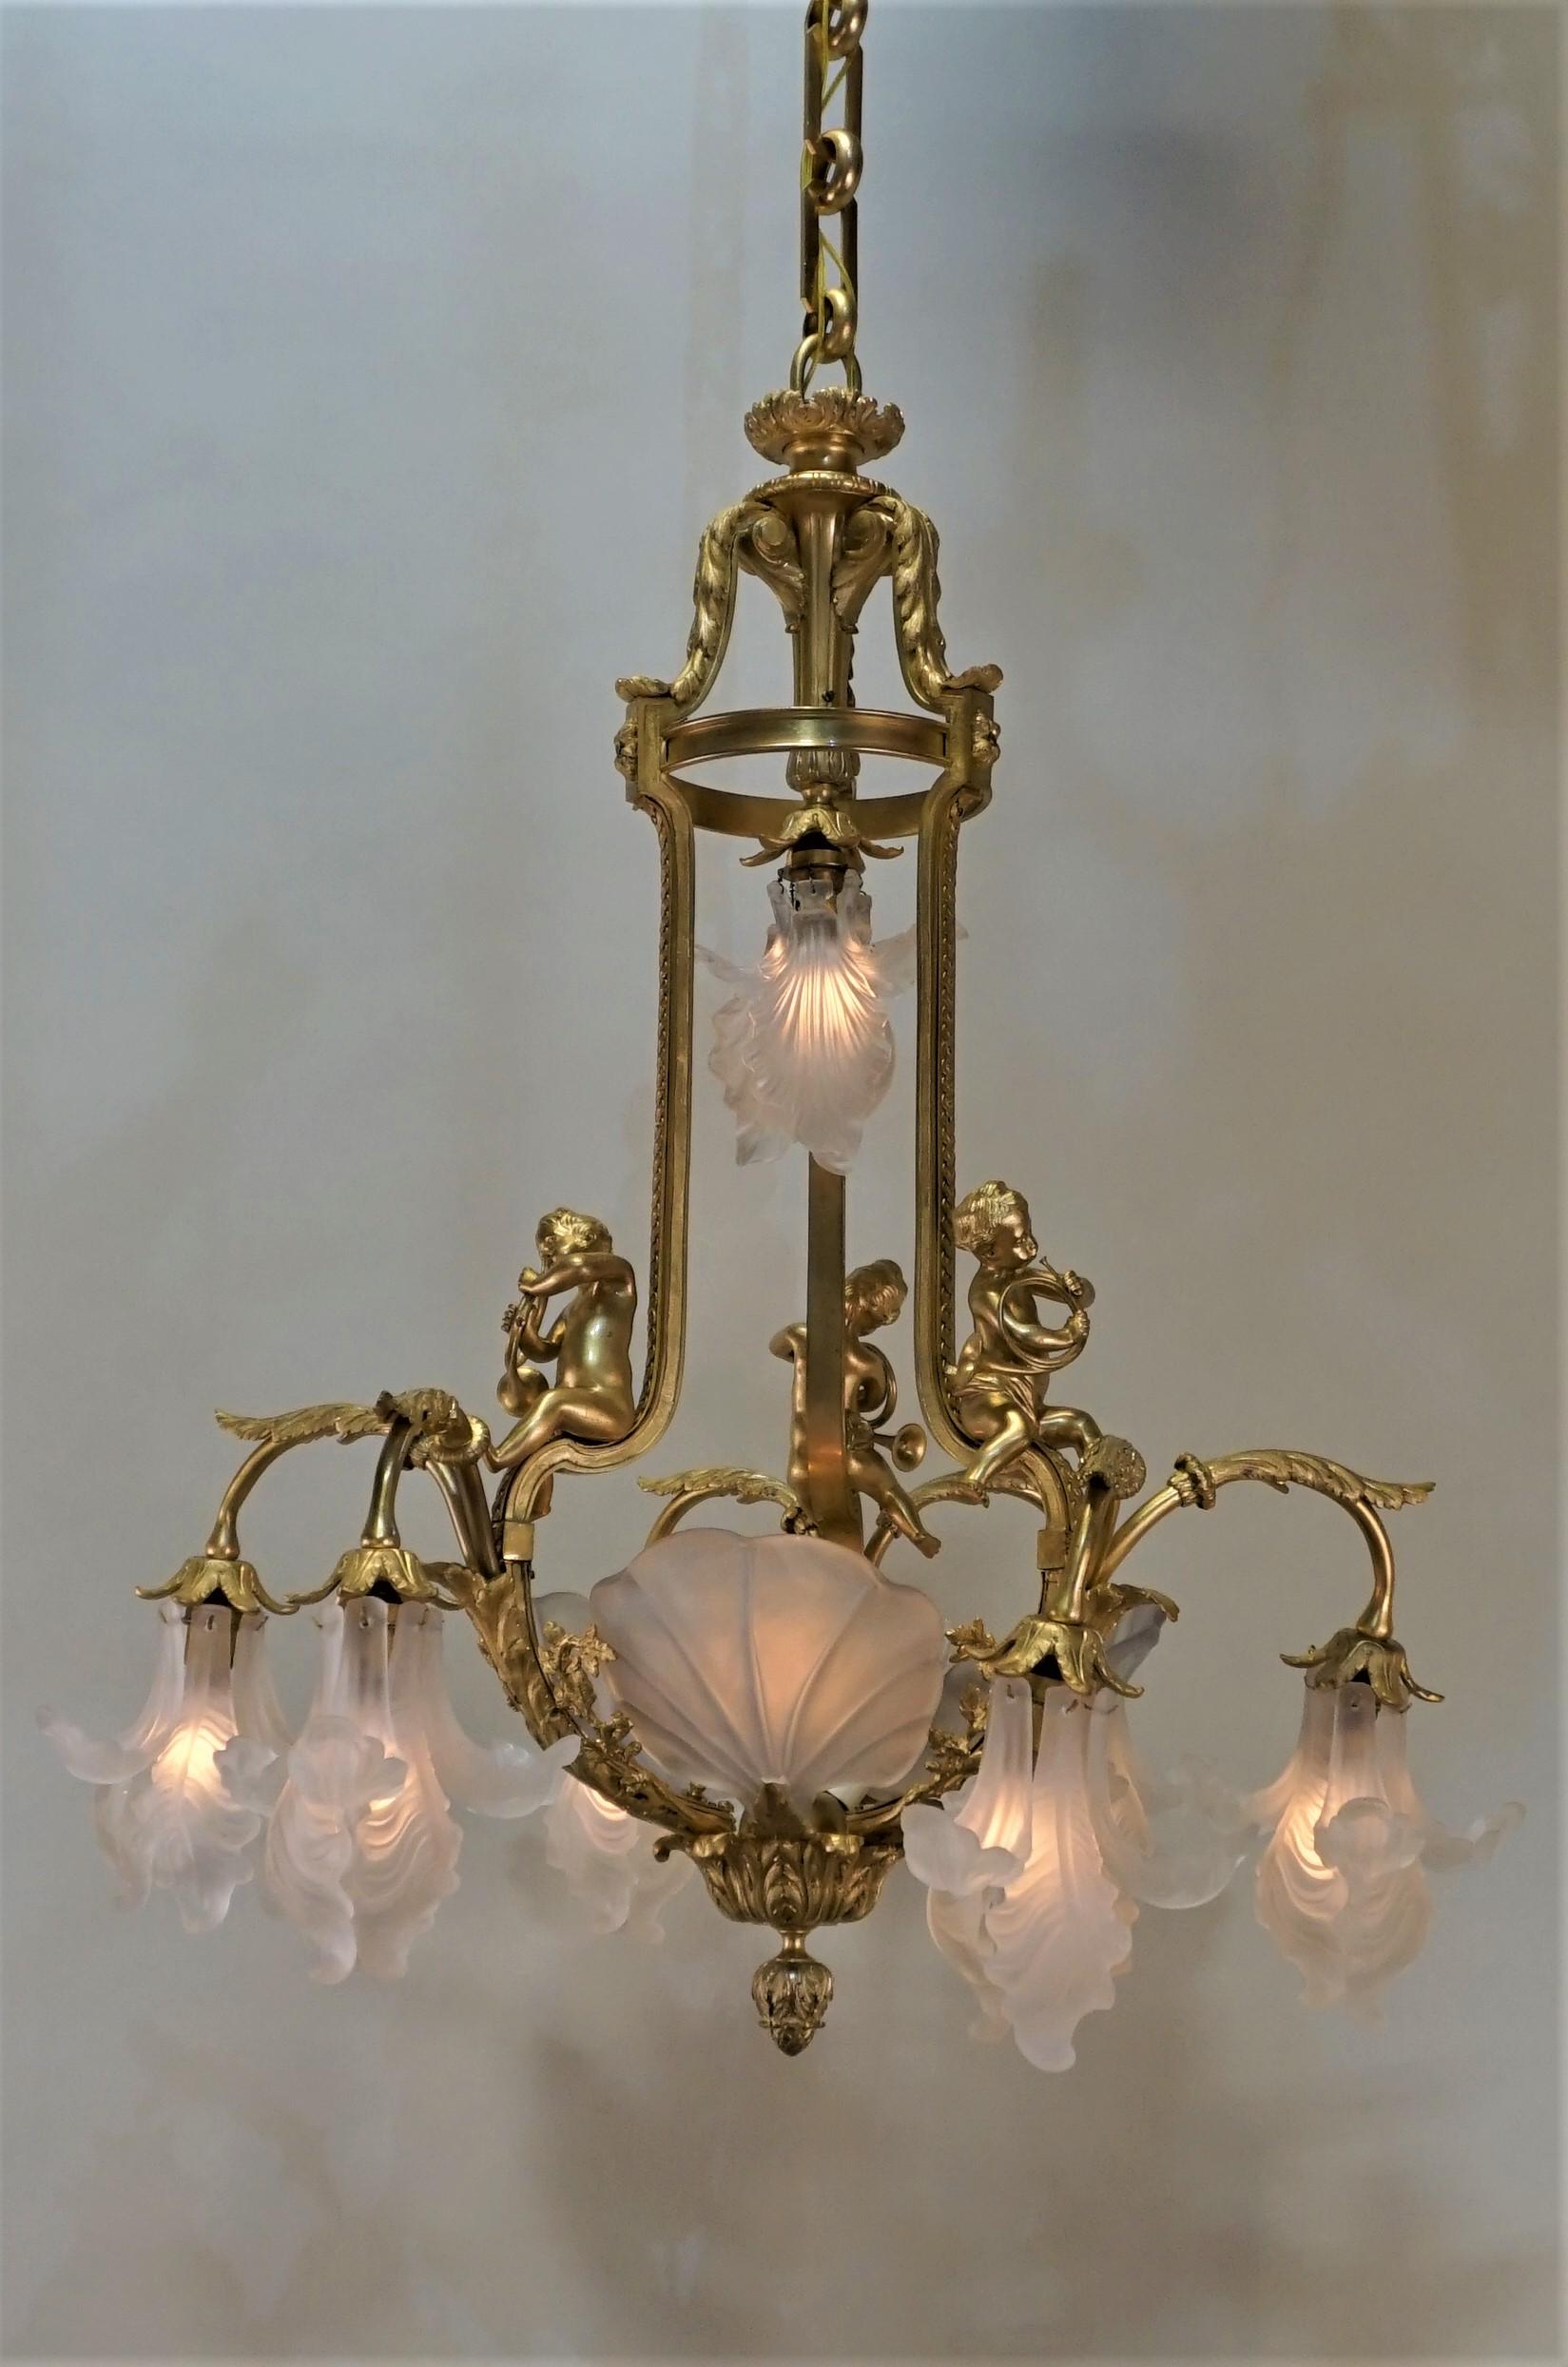 Important French Gilt Bronze Chandelier, Early 20th Century by E. Mottheau 2